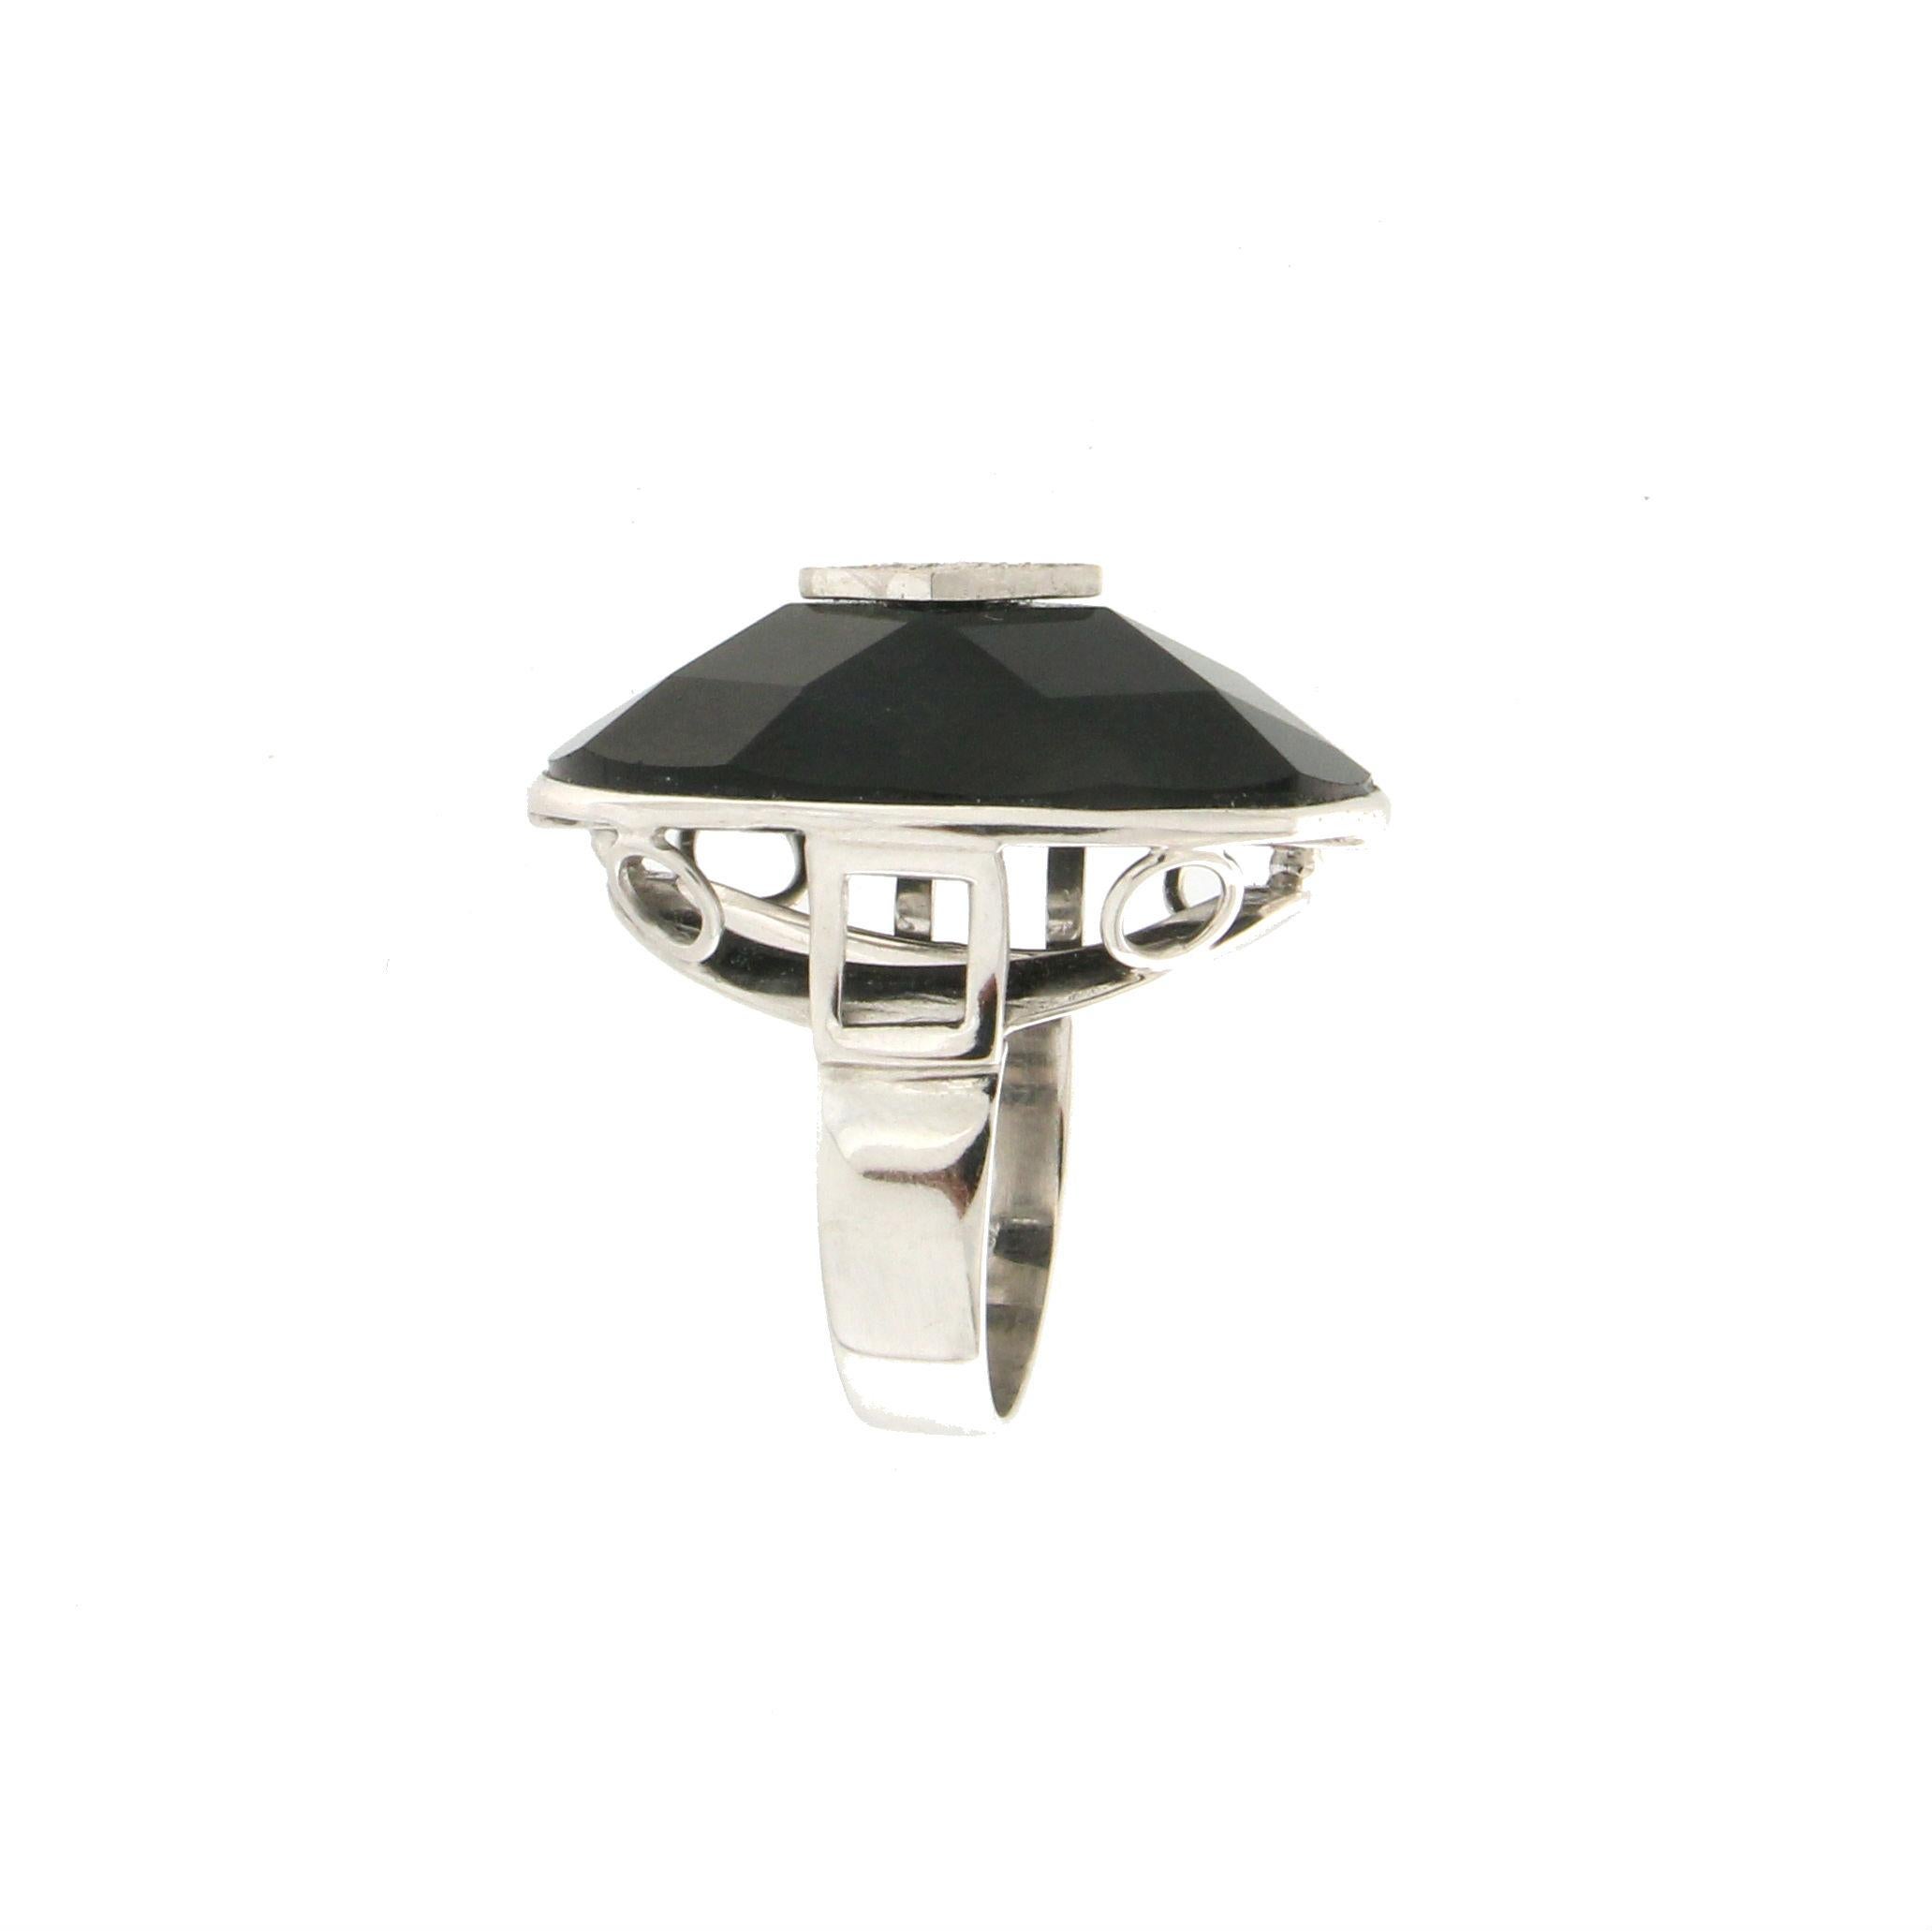 18 karat white gold cocktail ring. Handmade by our artisans assembled with diamonds and black onyx.

Diamonds weight 0.09 karat
Ring total weight 15.40 grams
Ring size 7.80 US 16 Ita
(all rings are can be resized)